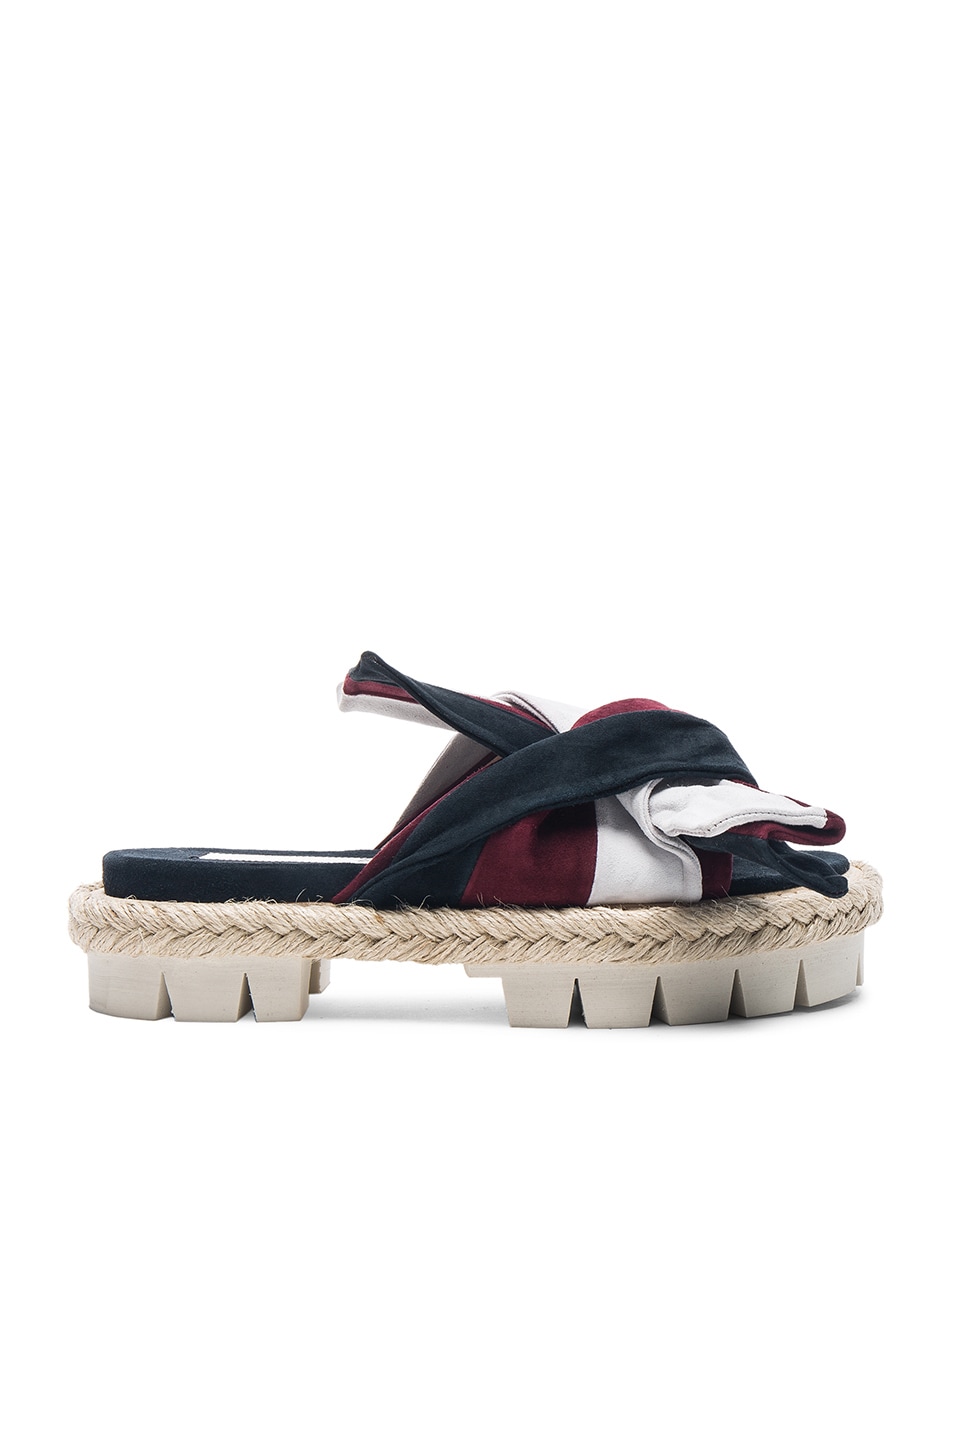 Image 1 of No. 21 Knot Front Espadrille Sandal in Navy, Bordeaux, & White